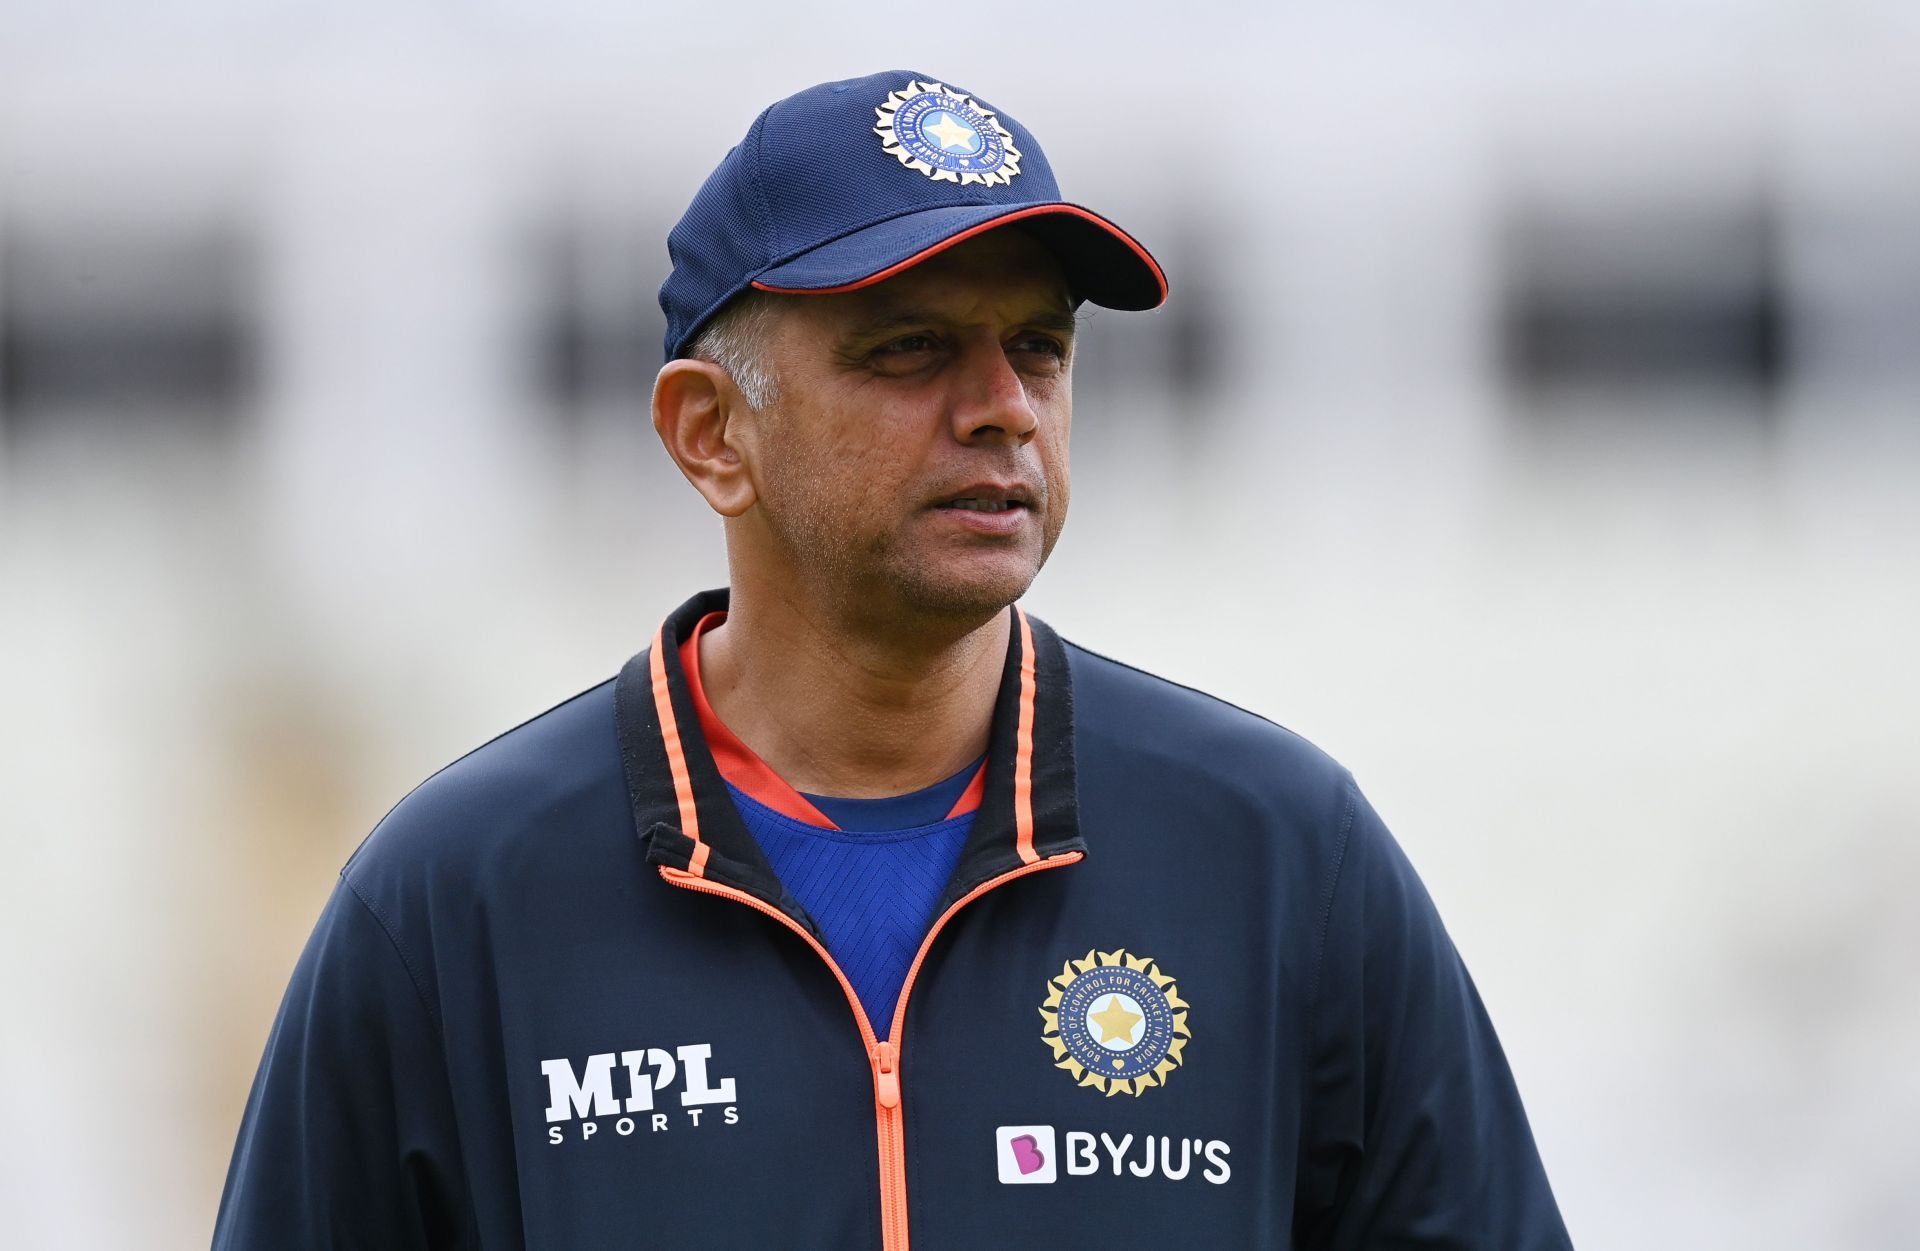 Rahul Dravid spoke about how he realized his true potential. (P.C.:Getty)